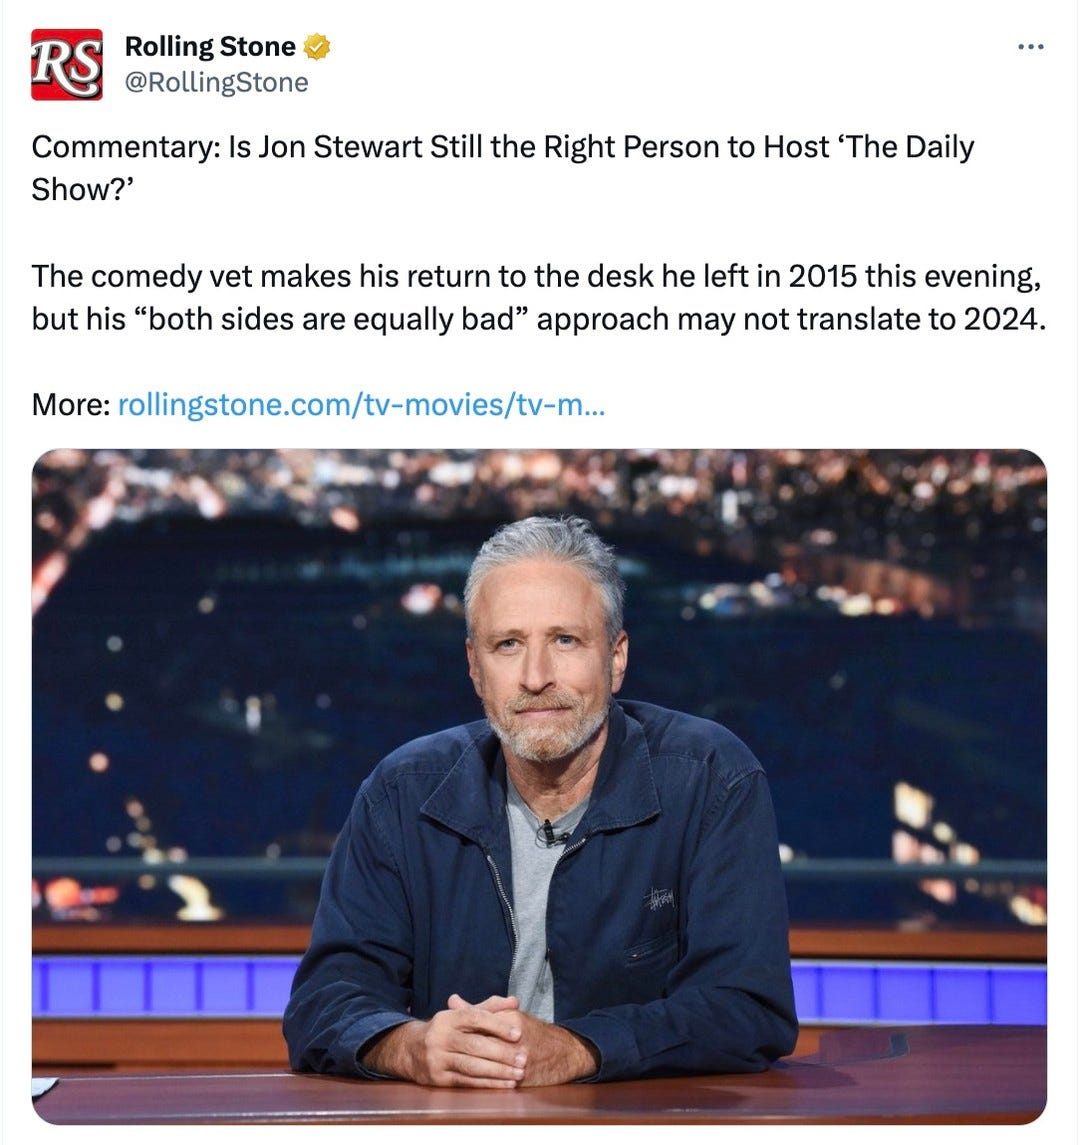 Photo by Matt Ruby on February 13, 2024. May be a Twitter screenshot of 1 person and text that says 'RS Rolling Stone @RollingStone Commentary: Is Jon Stewart Still the Right Person to Host 'The Daily Show?' The comedy vet makes his return to the desk he left in 2015 this evening, but his "both sides are equally bad" approach may not translate to 2024. More: rolingtone.com/tv-movies/tvm..'.